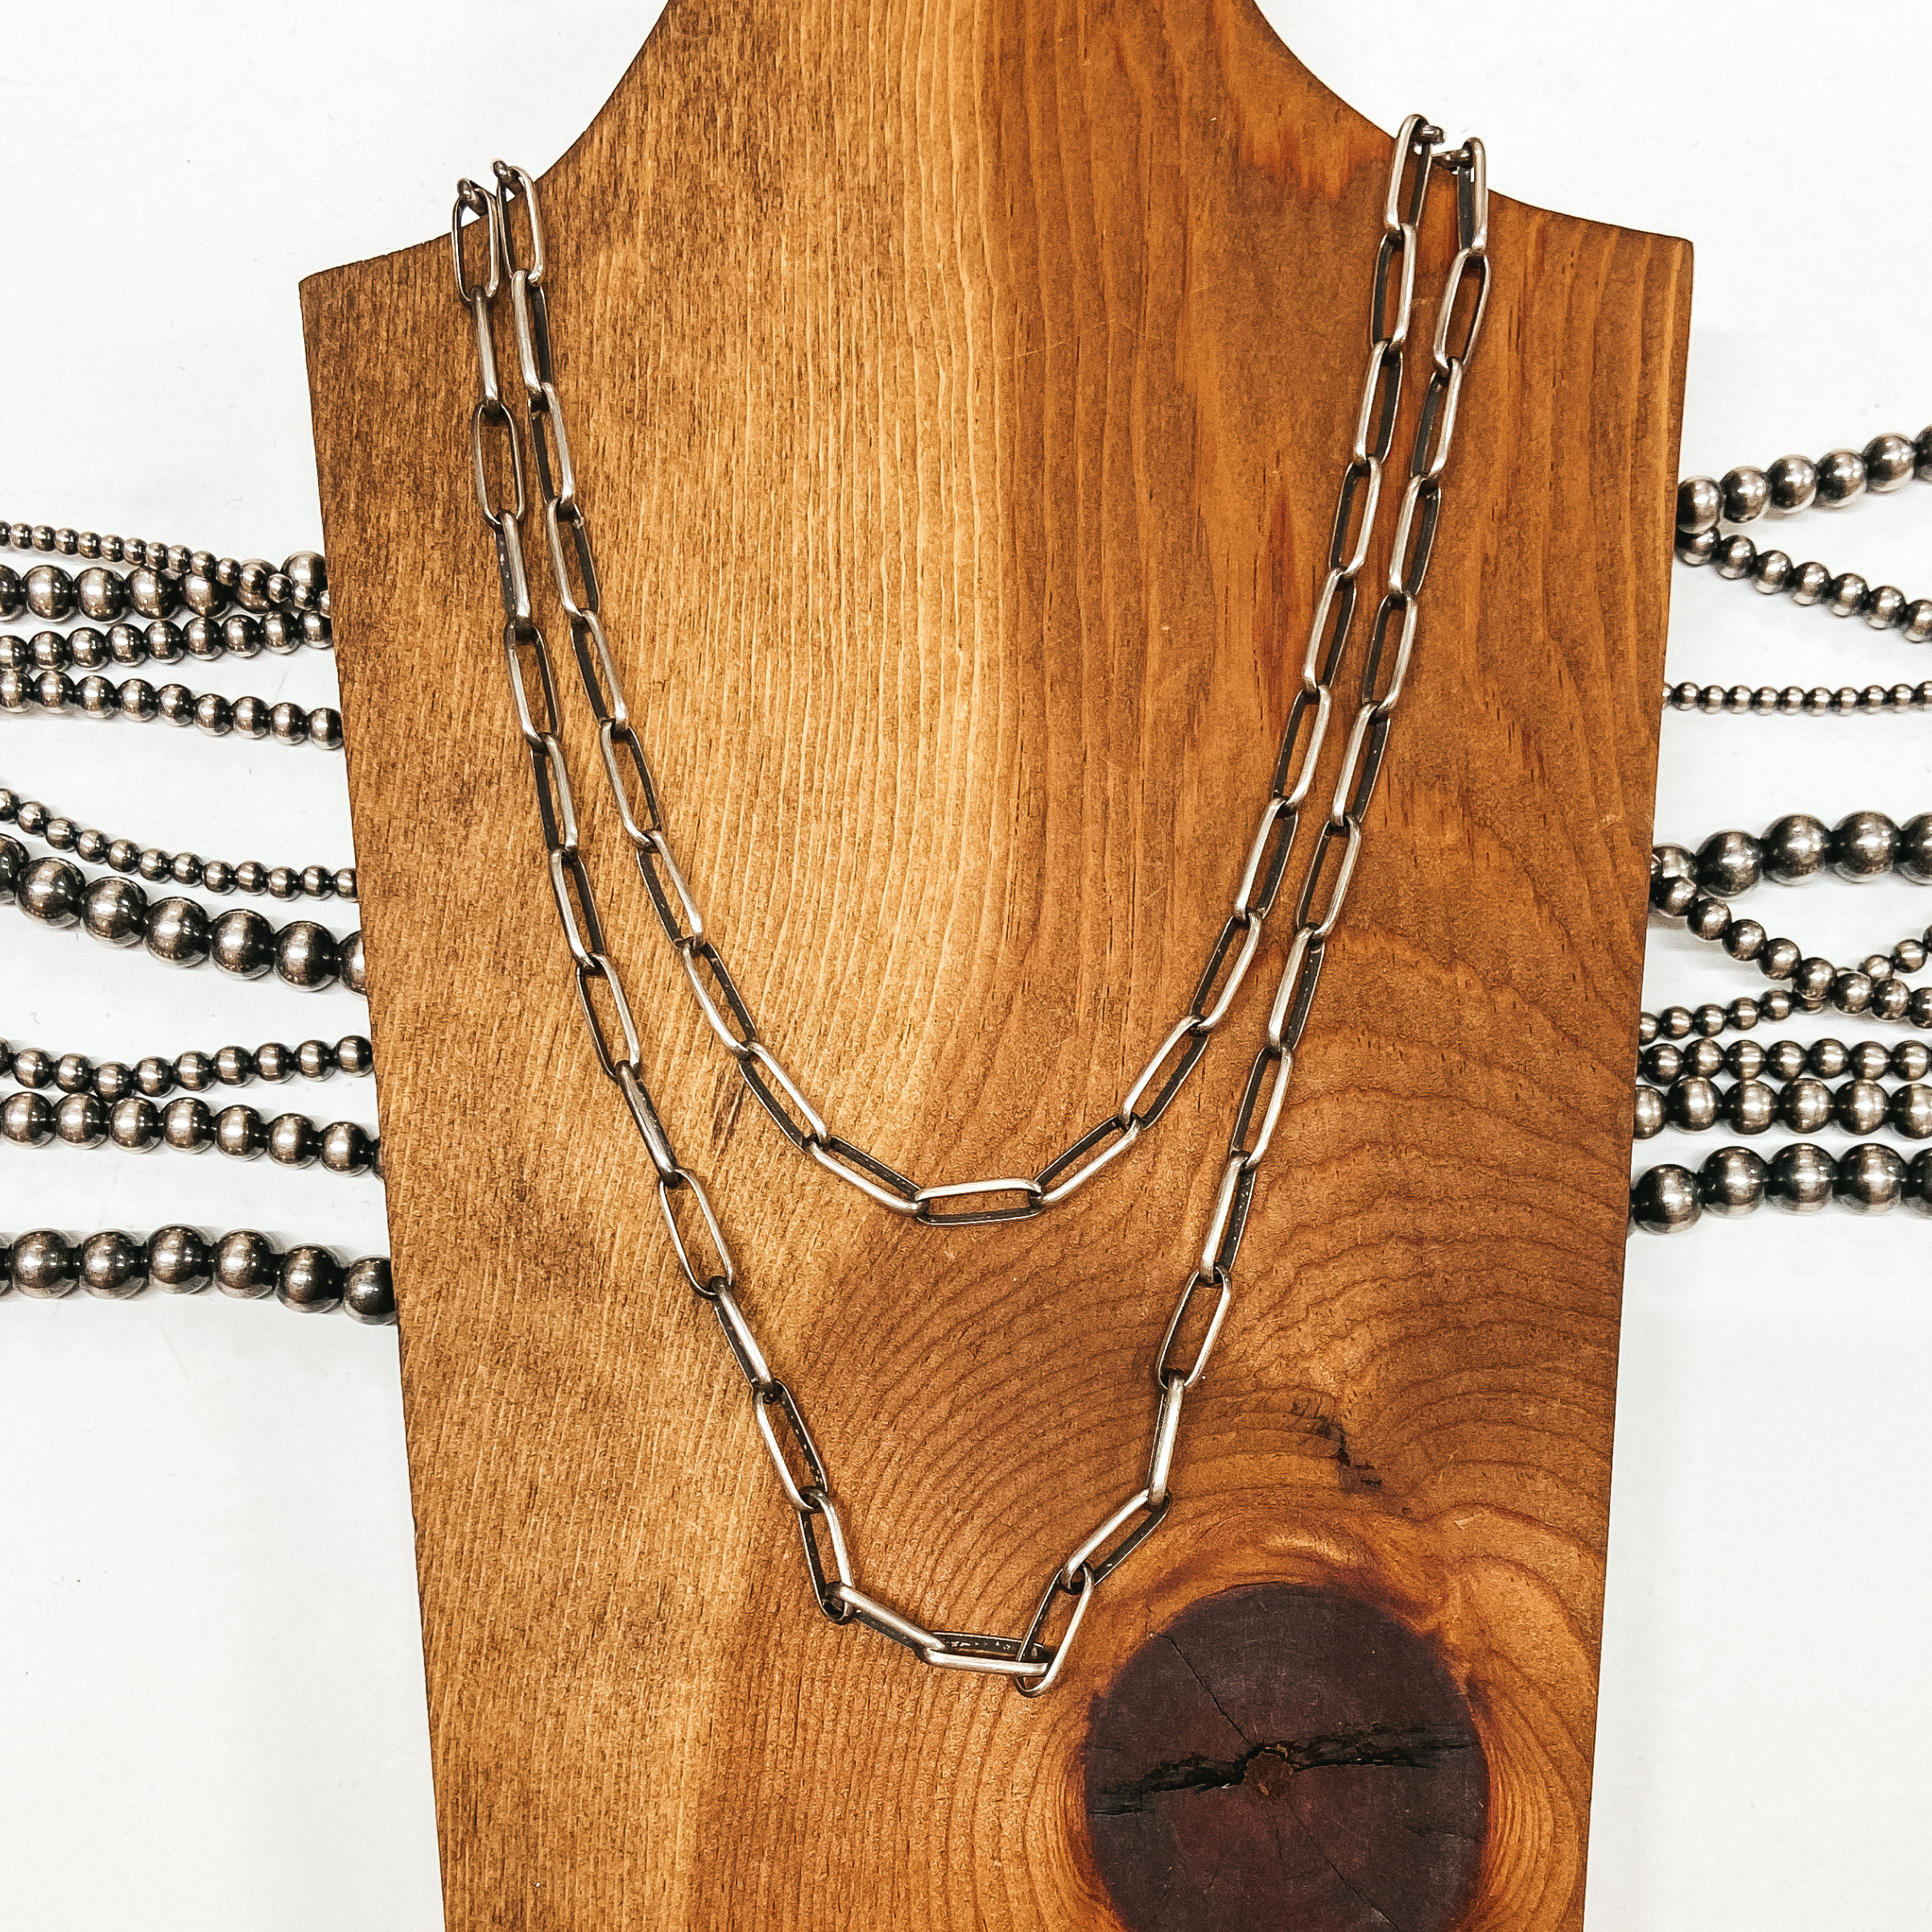 Sterling silver chain link necklace two strands placed on wooden slat. Pictured on white background with Navajo pearls.